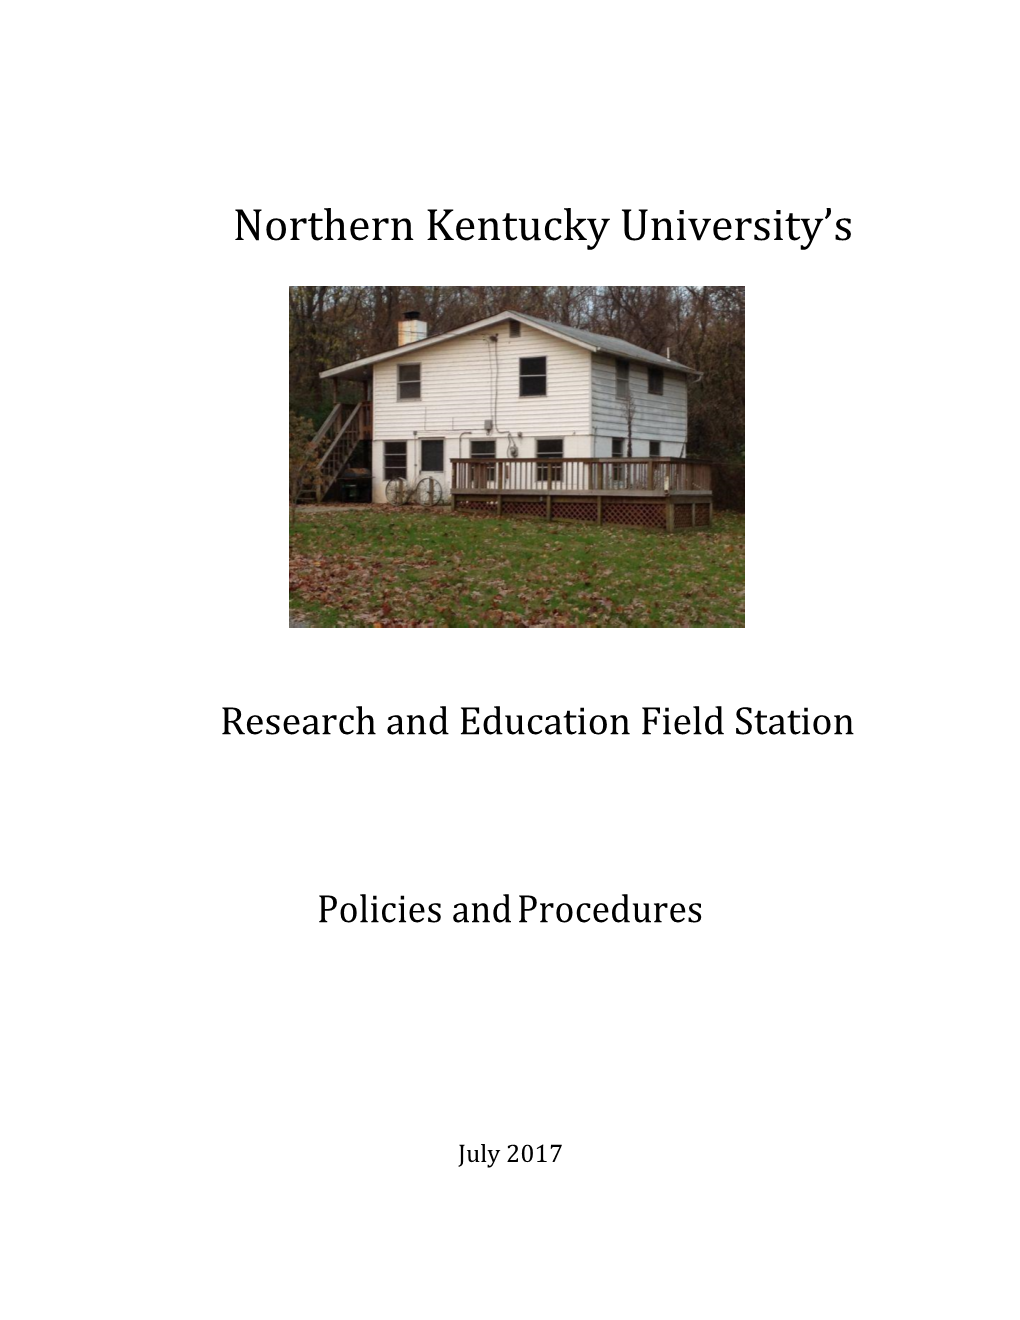 Research and Education Field Station Policies and Procedures